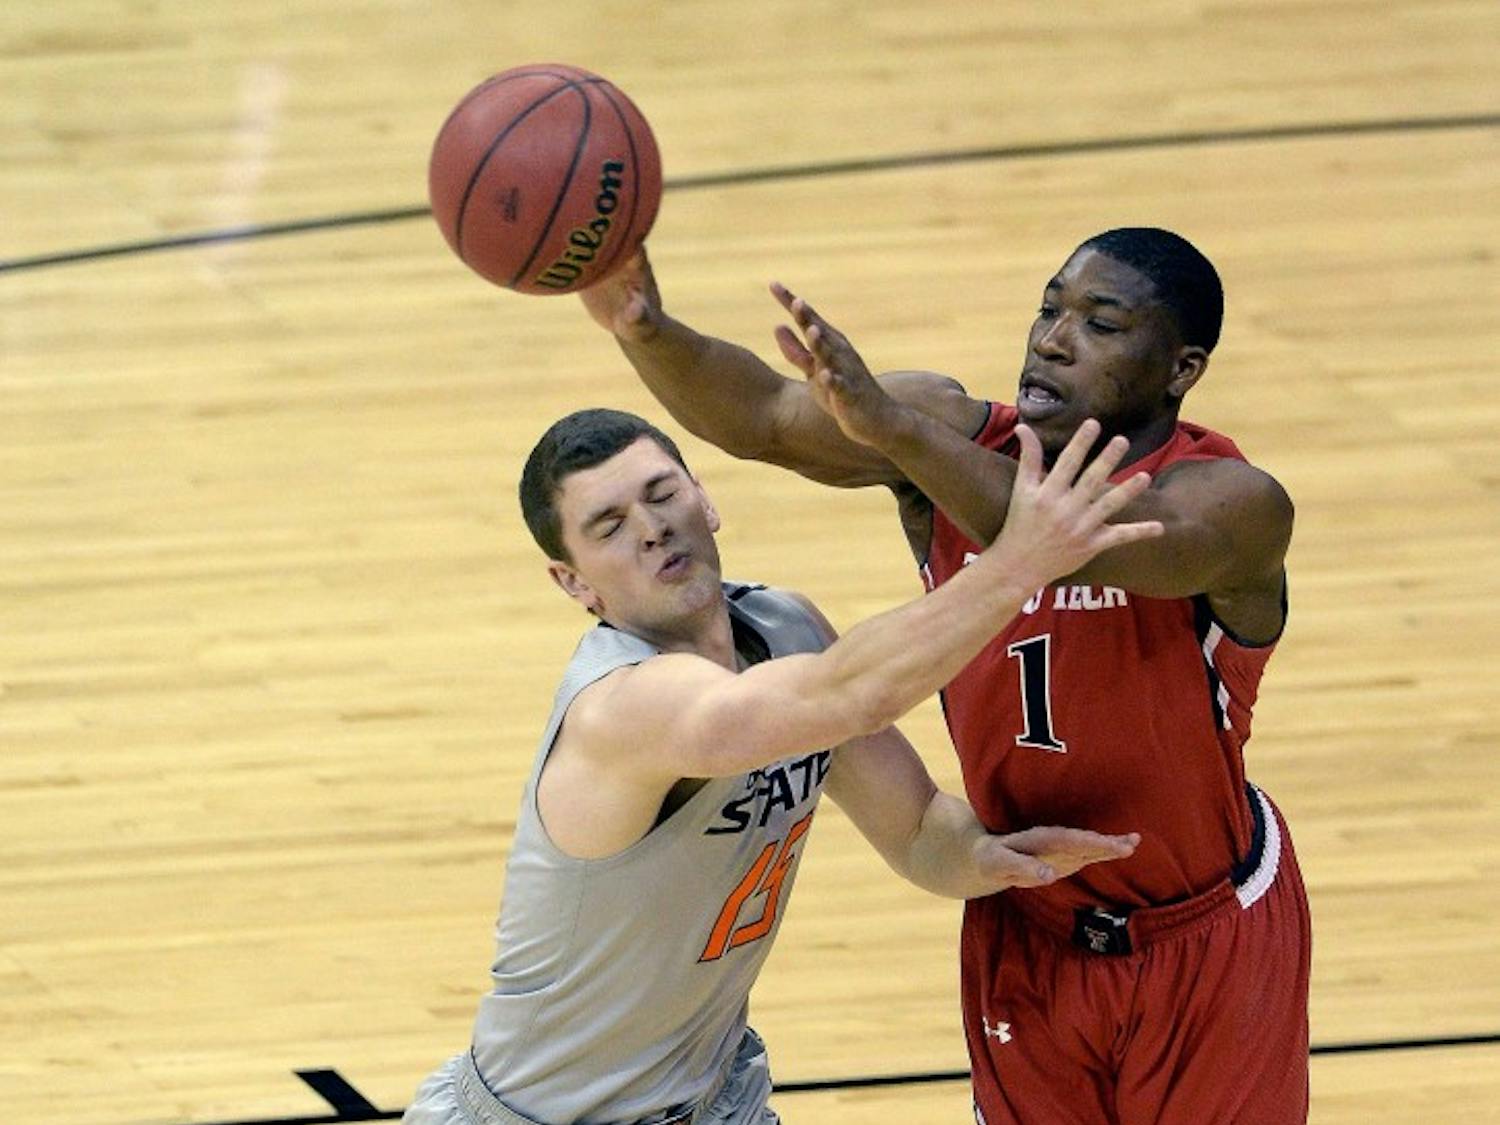 Oklahoma State's Christien Sager (15) tries to slow down Texas Tech's Randy Onwuasor (1) during the first round of the Big 12 Tournament at the Sprint Center in Kansas City, Mo., Wednesday, March 12, 2014. (John Sleezer/Kansas City Star/MCT)